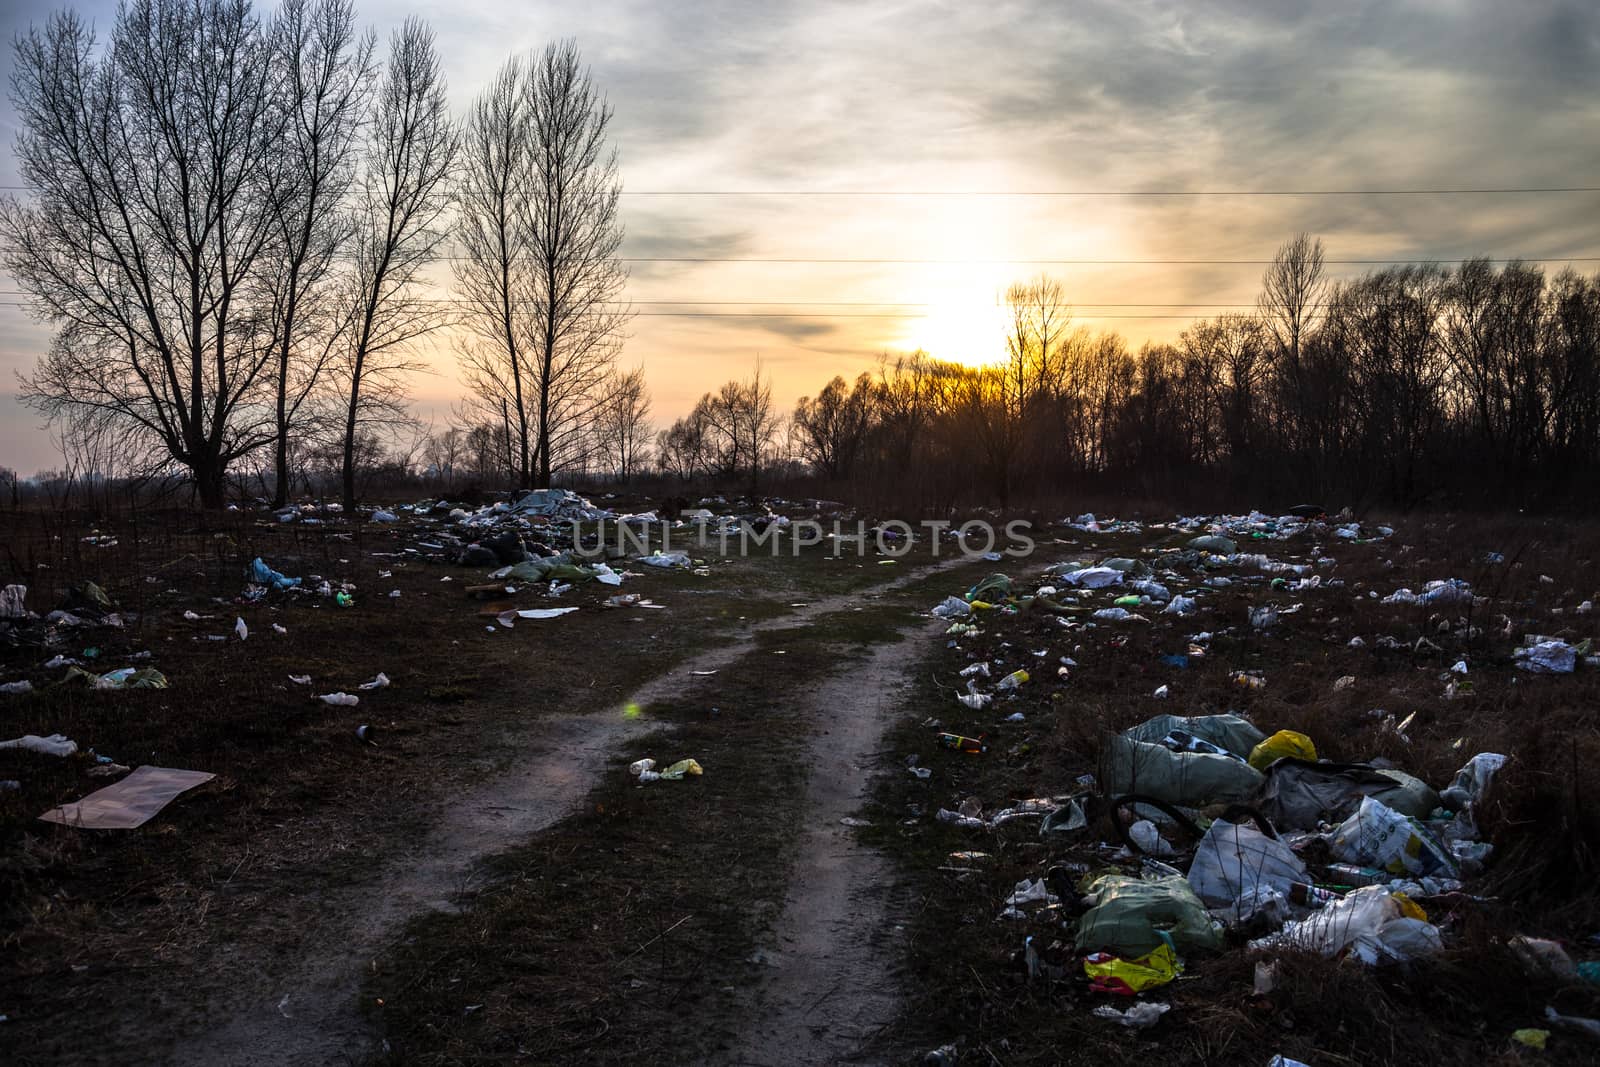 Piles of garbage near the dirt road with sunset background